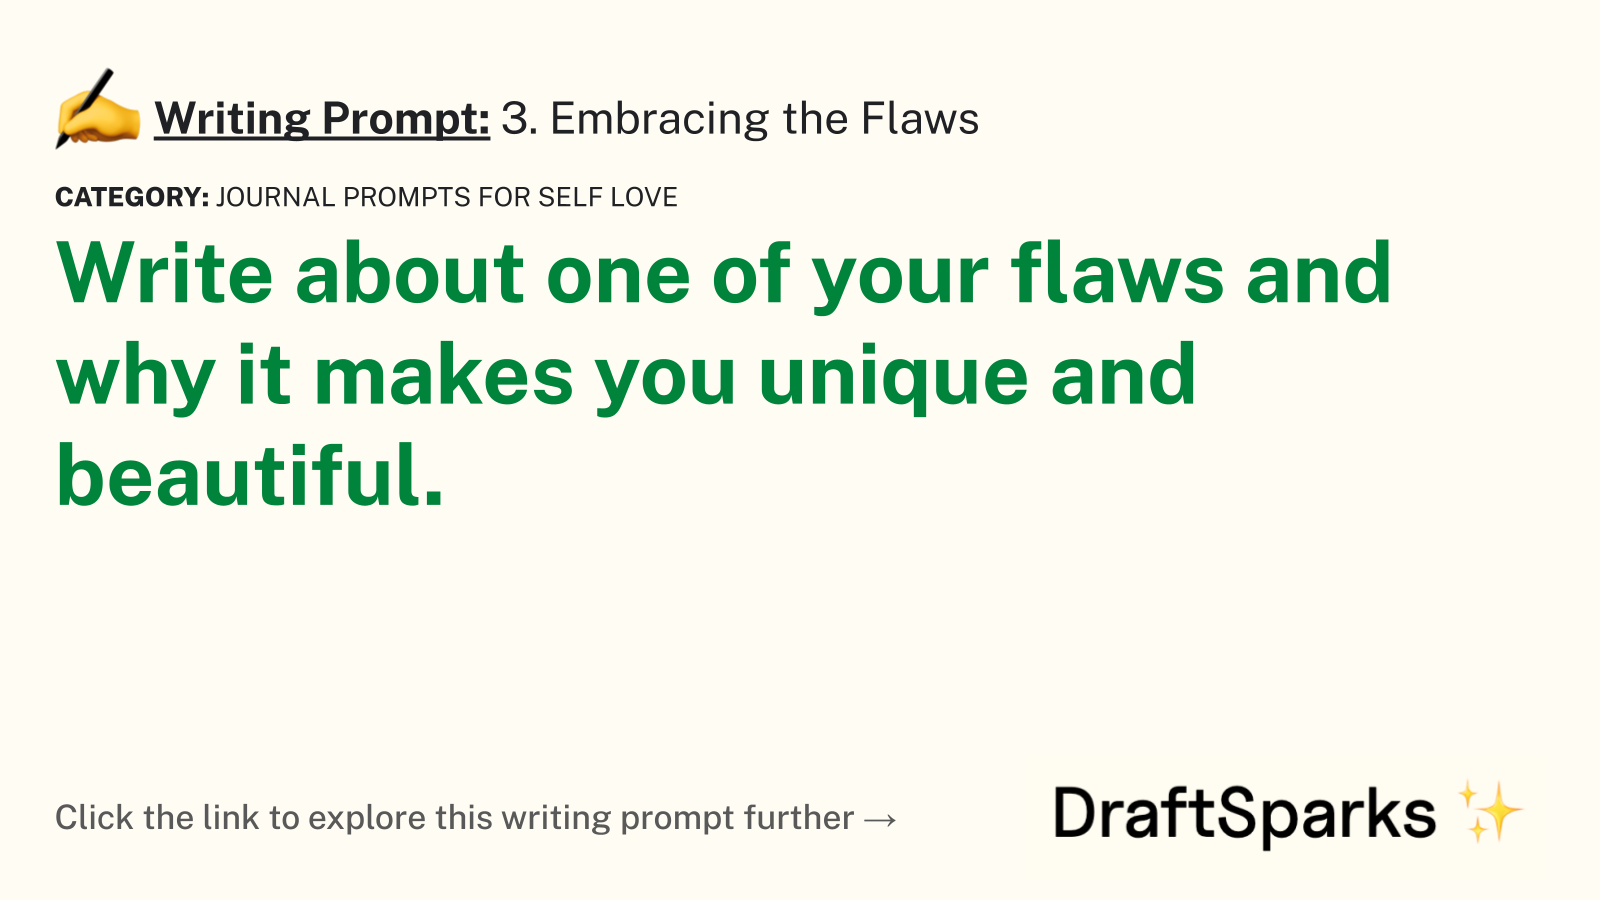 3. Embracing the Flaws